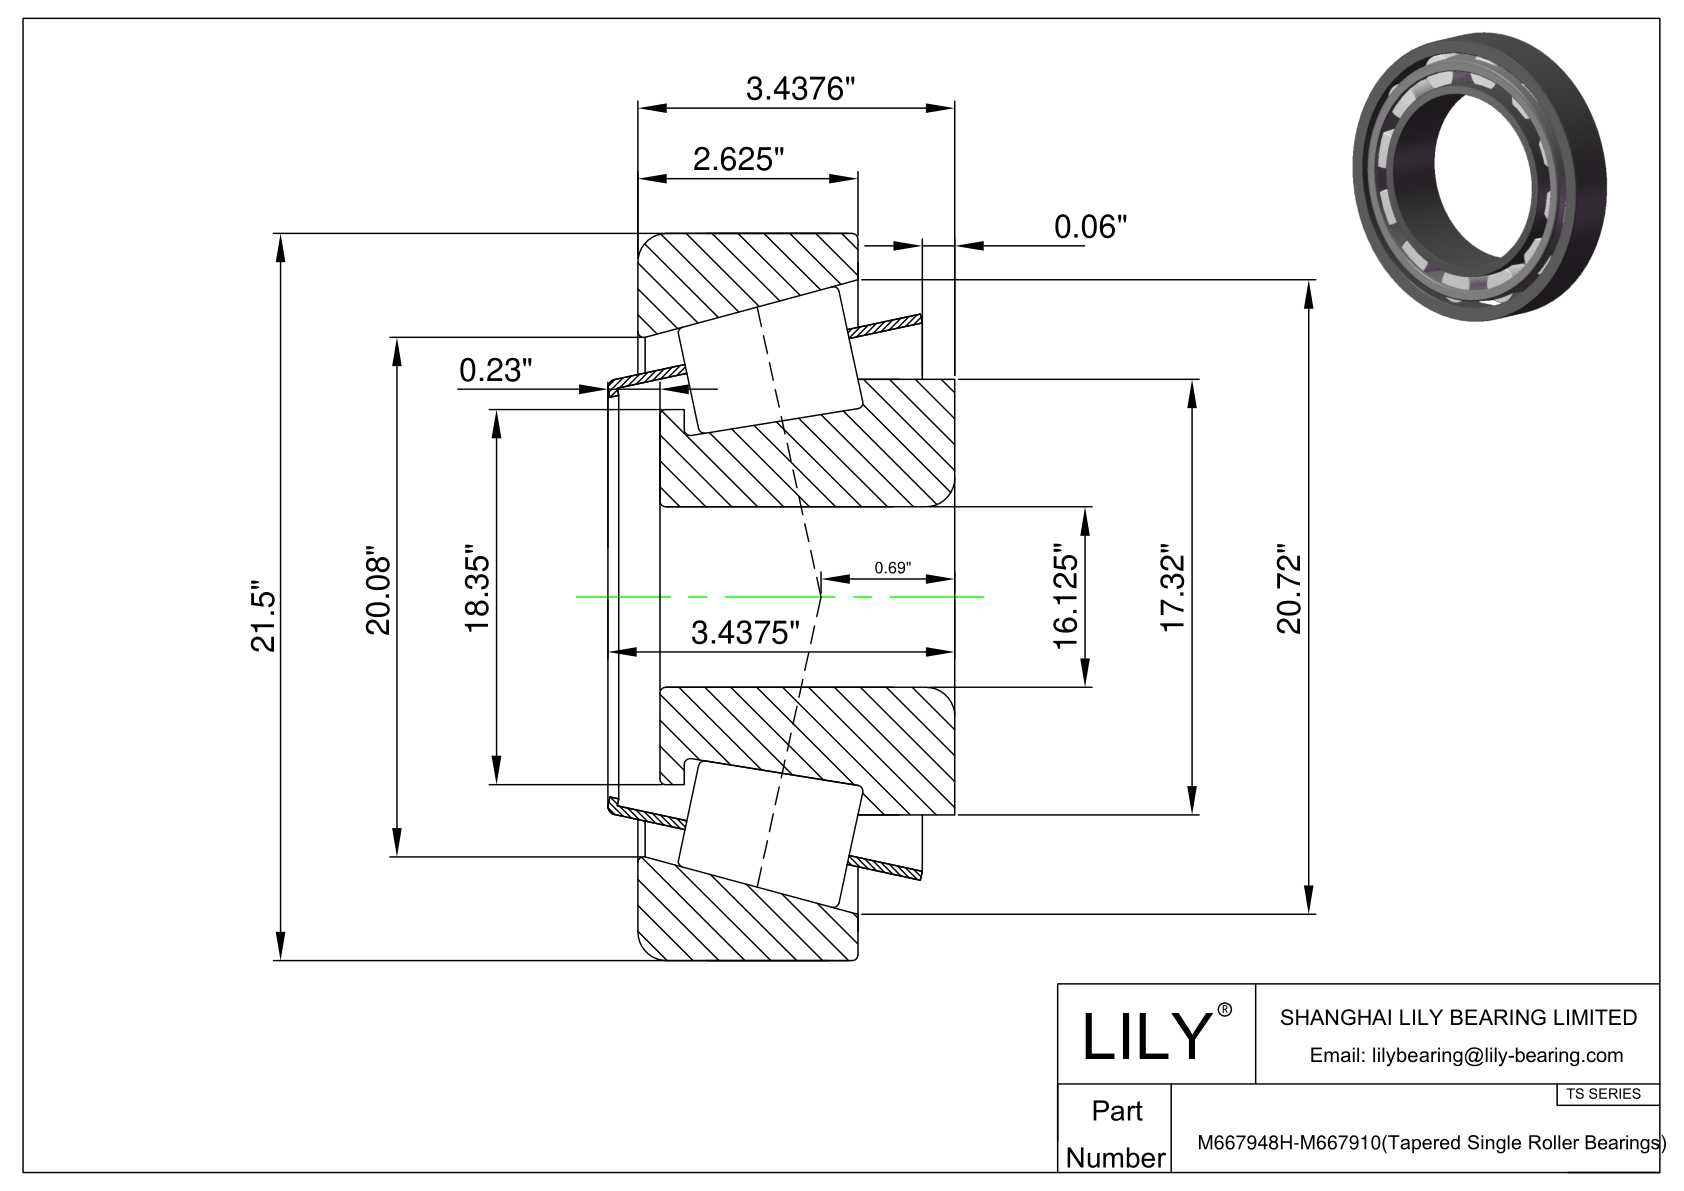 M667948H-M667910 TS (Tapered Single Roller Bearings) (Imperial) cad drawing